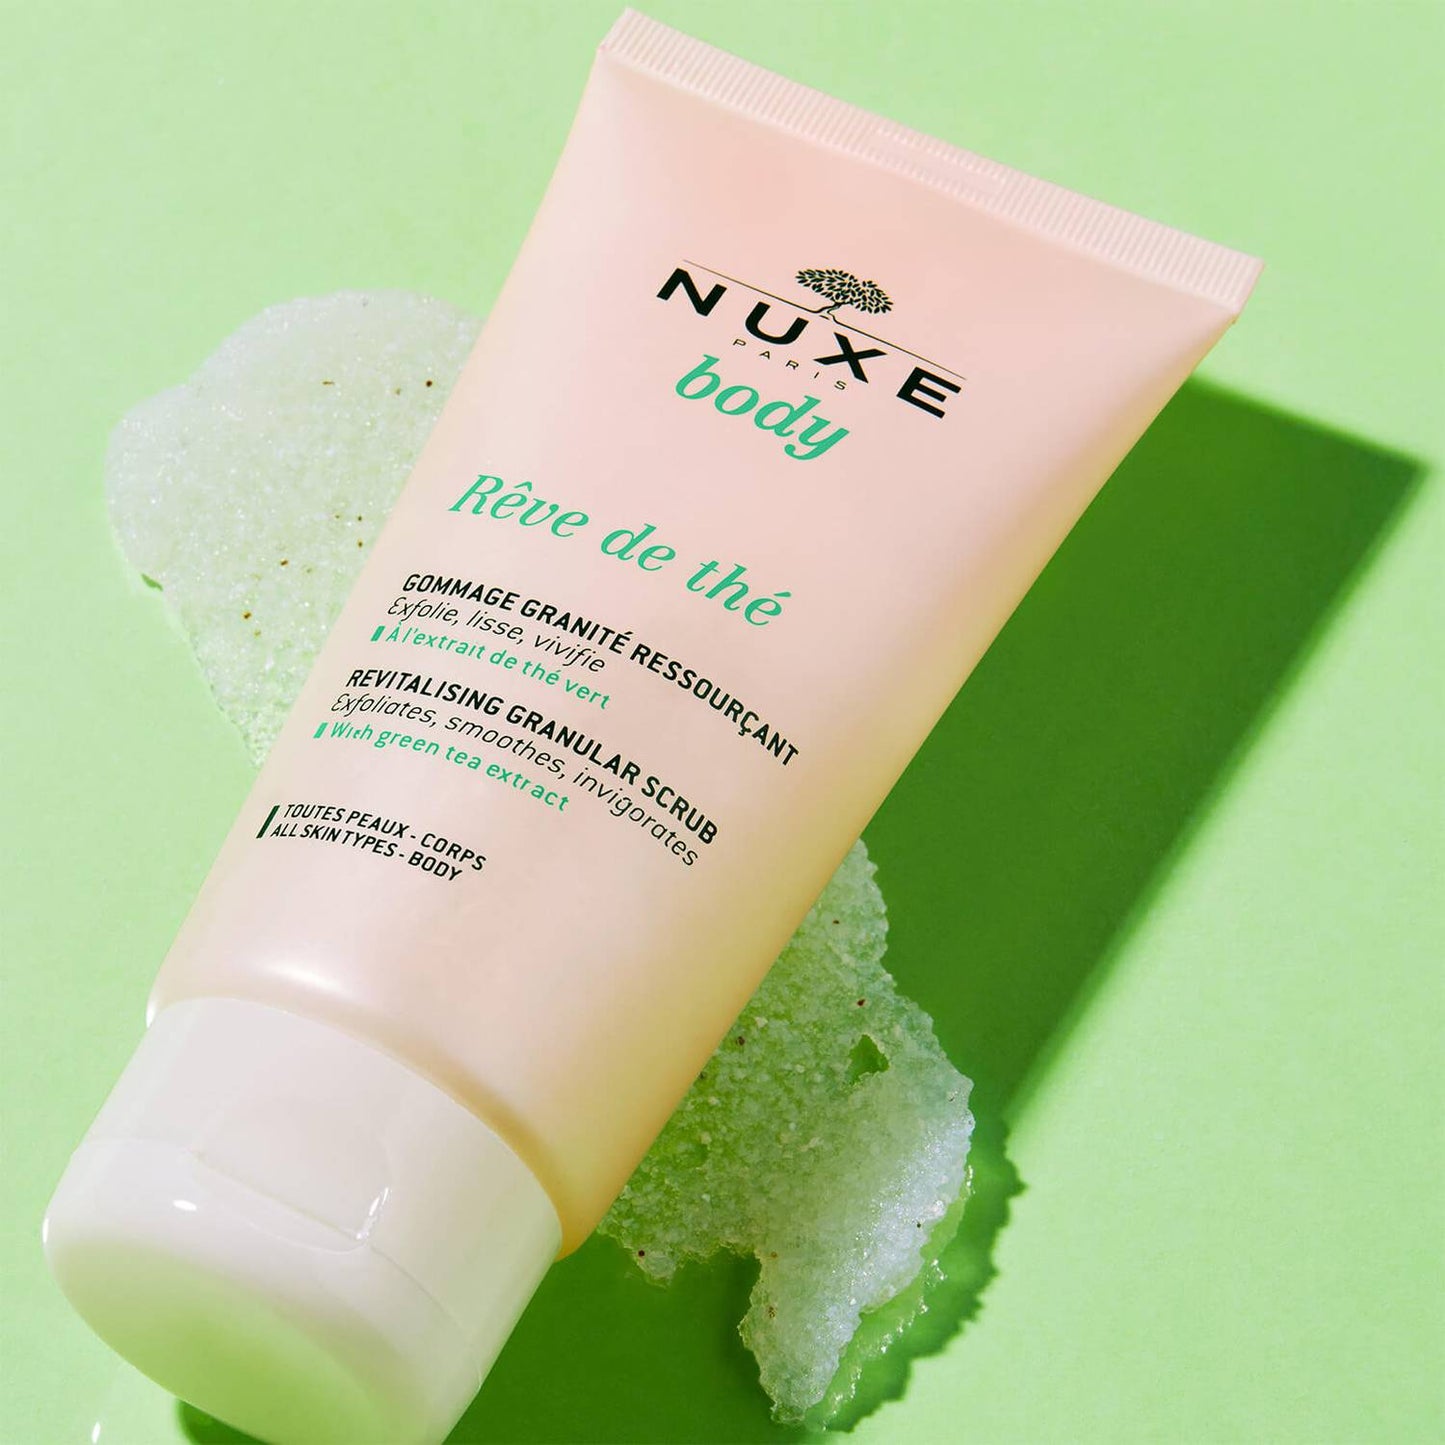 Nuxe Revitalising Granular Scrub, Rêve de Thé with its granular texture and fruity-herbal scent stimulate the senses while imparting a revitalising sensation.